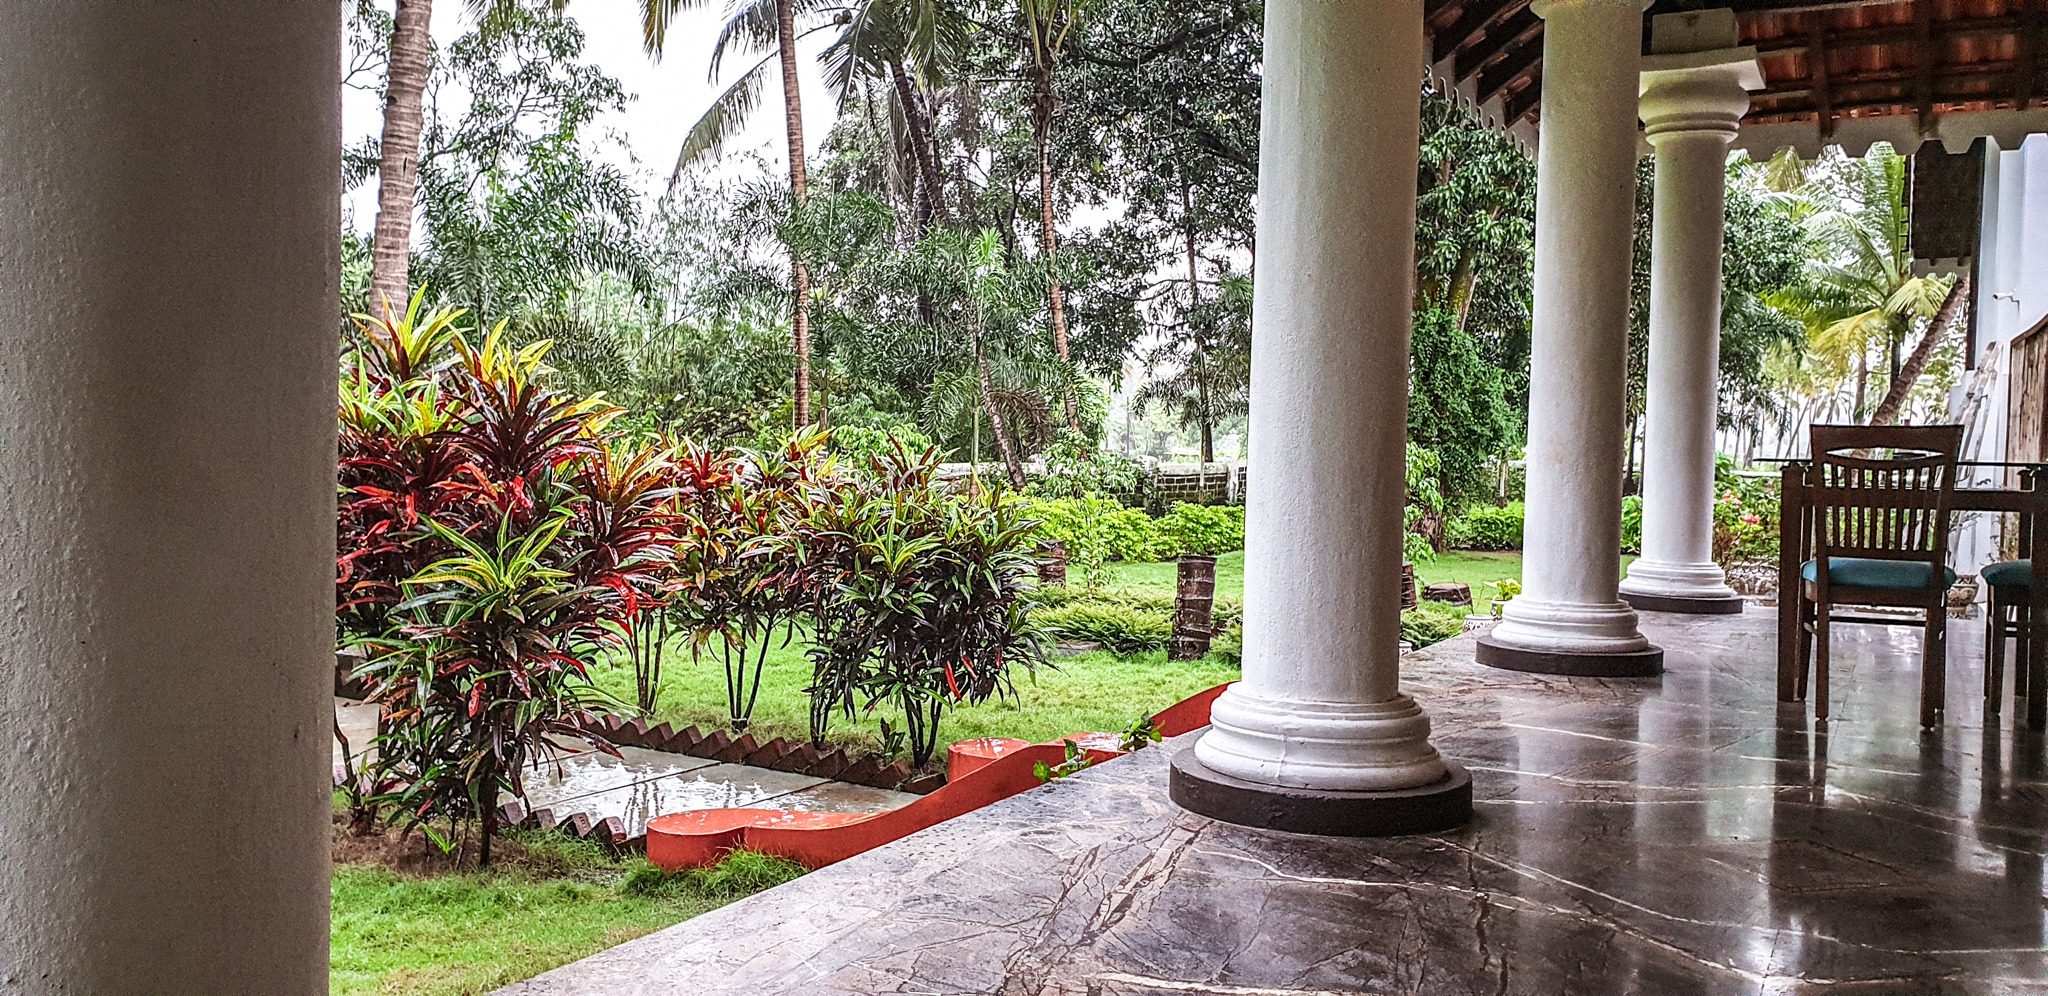 Read more about the article The best historical and natural places to visit in Goa, India